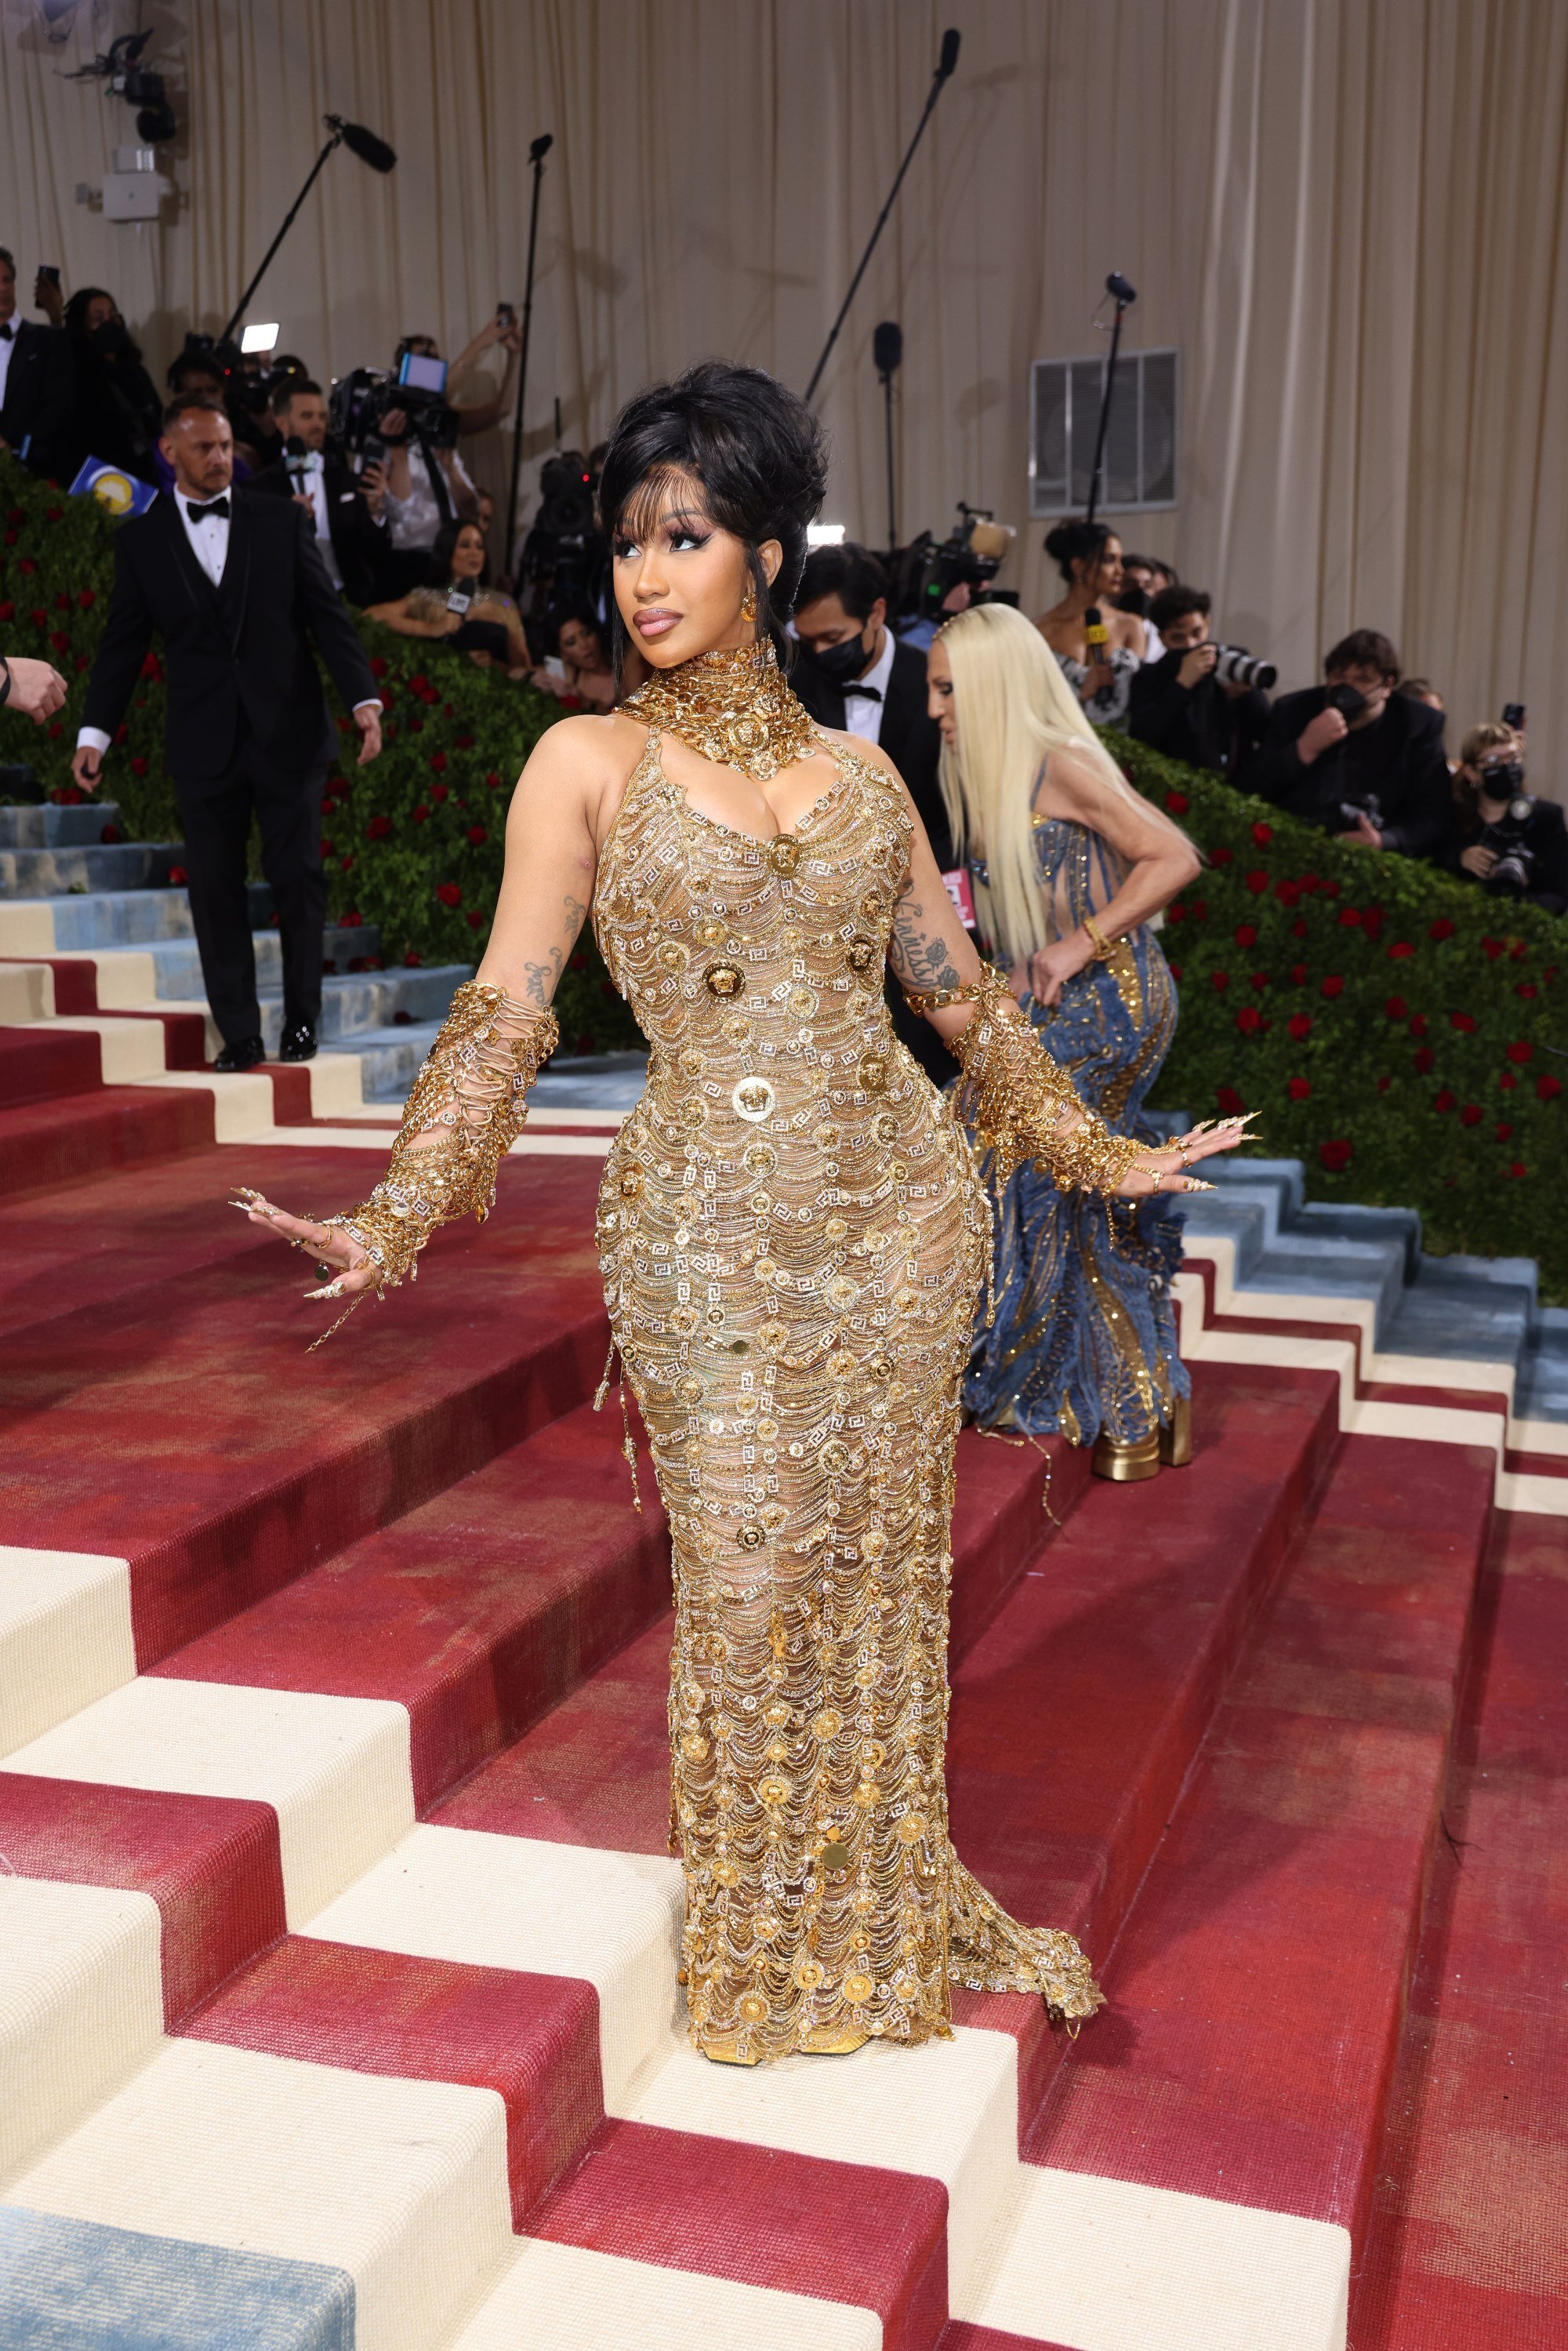 Cardi B wore a stunning Atelier Versace dress on the red carpet for the Met Gala. Photo: EPA-EFE